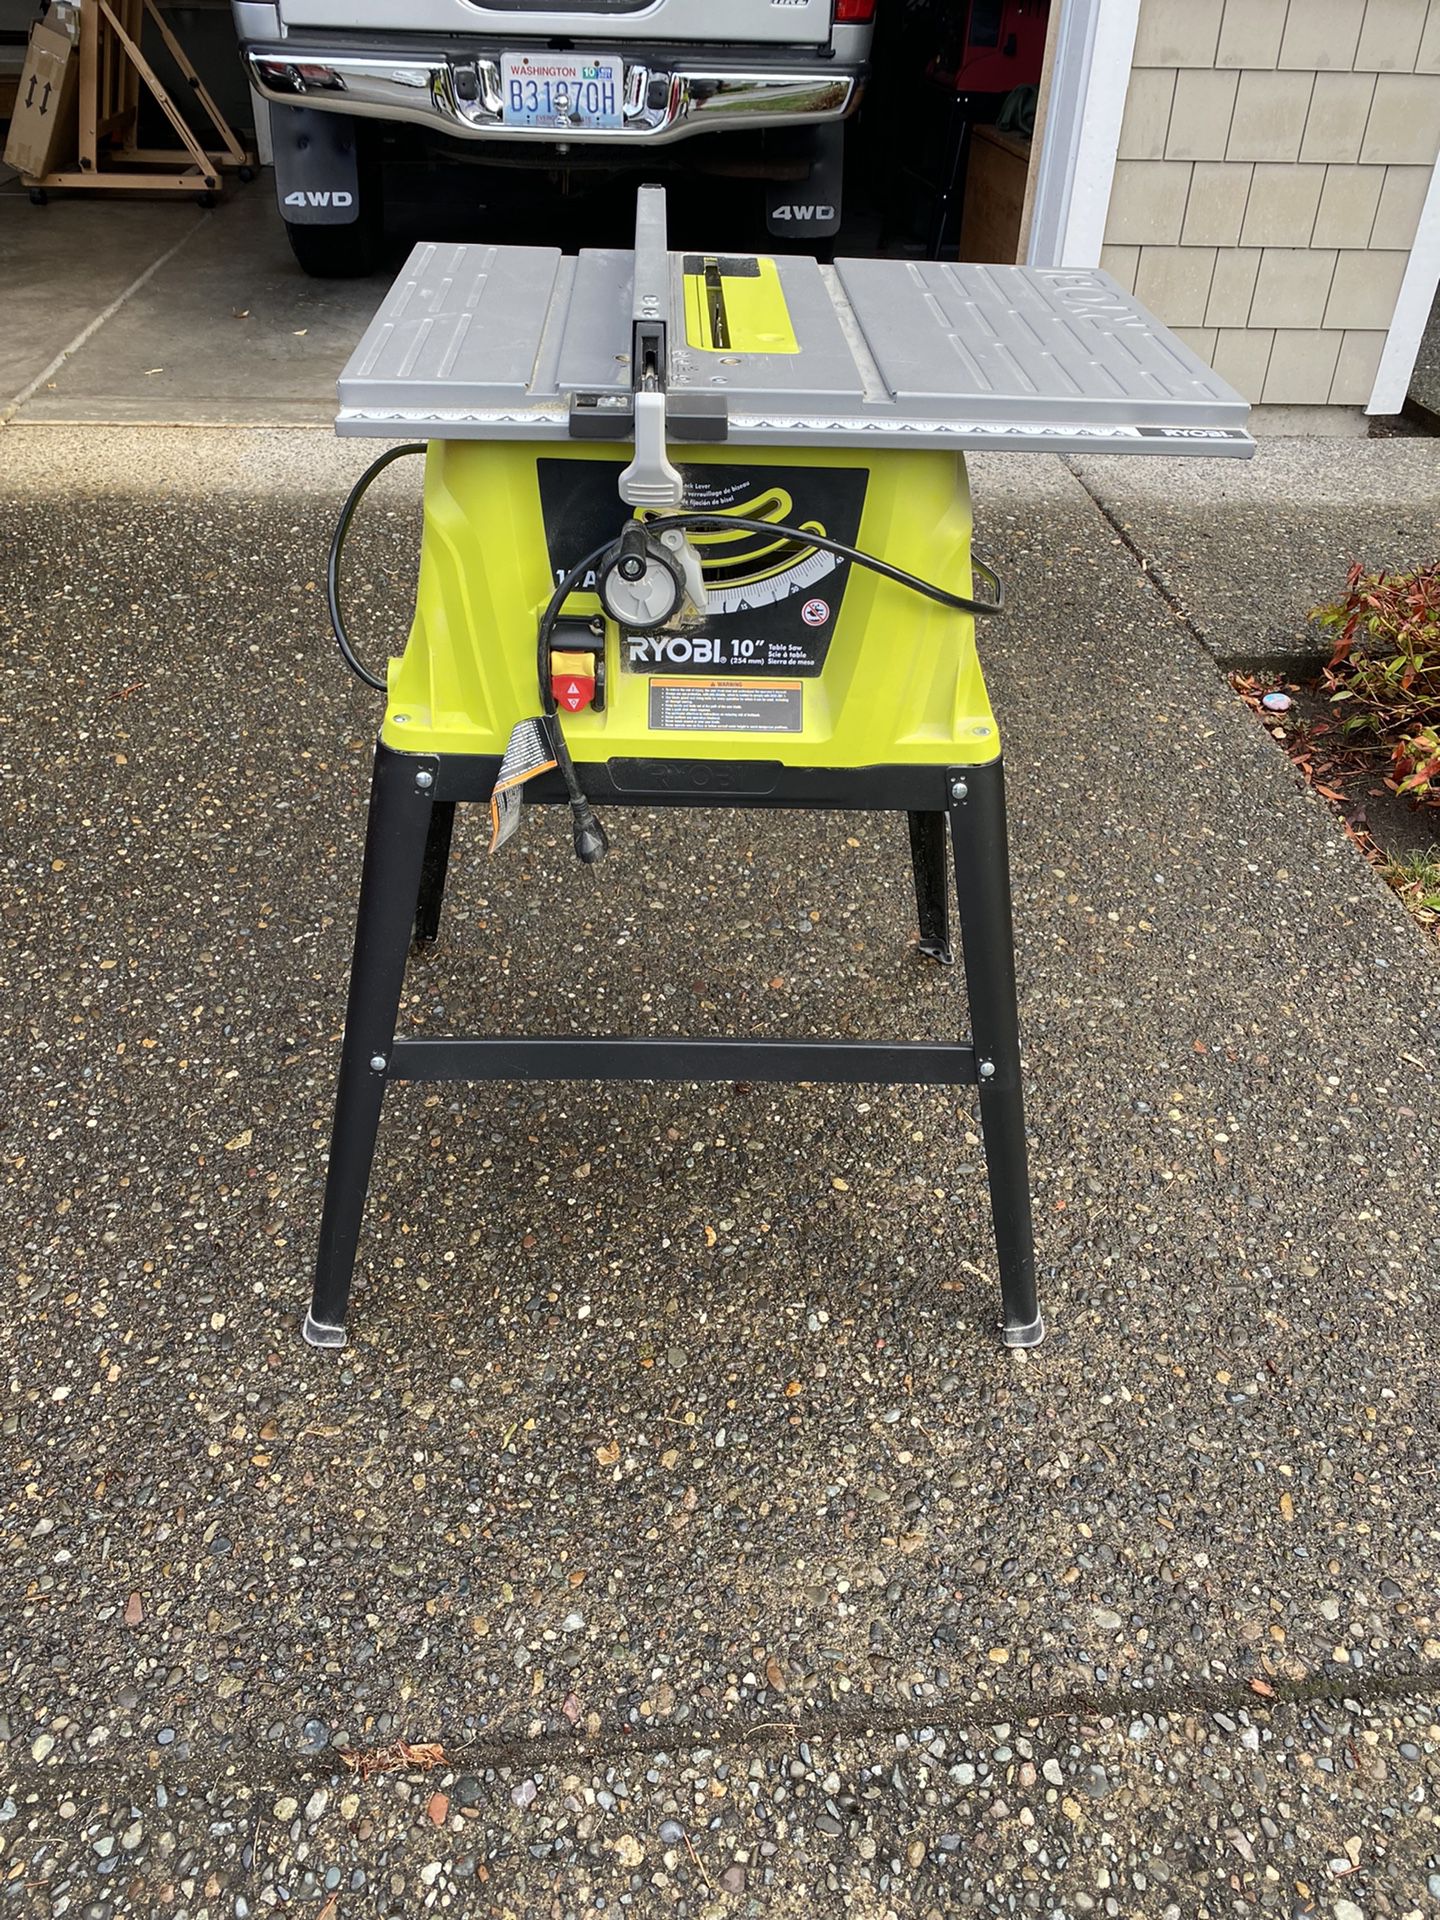 Ryobi 10” Table Saw Excellent Condition 